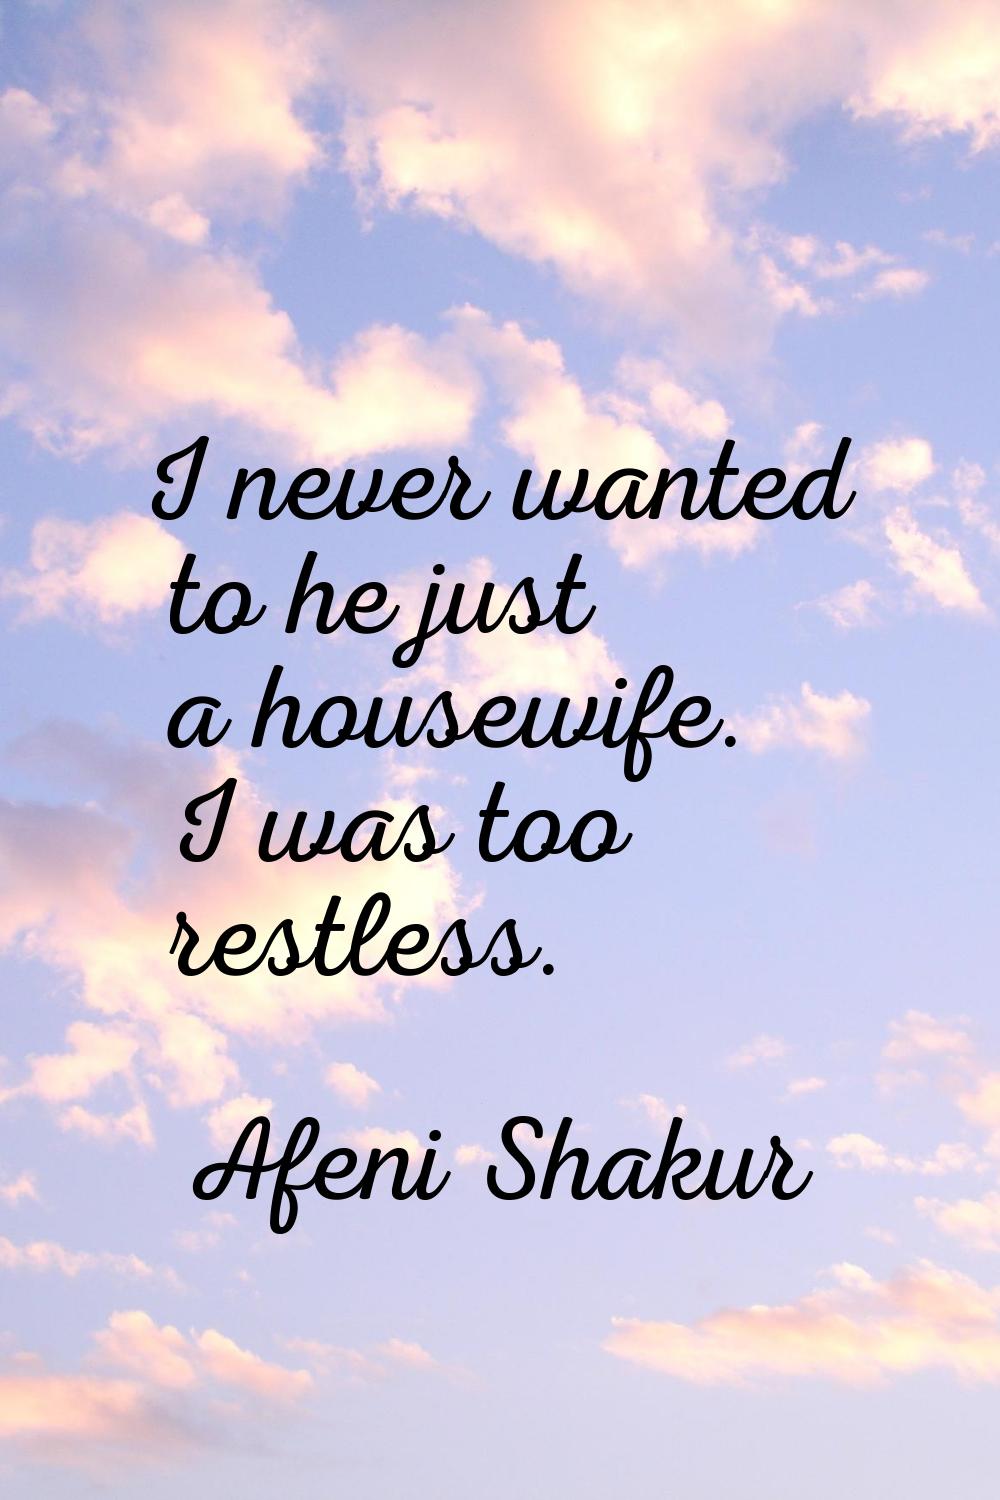 I never wanted to he just a housewife. I was too restless.